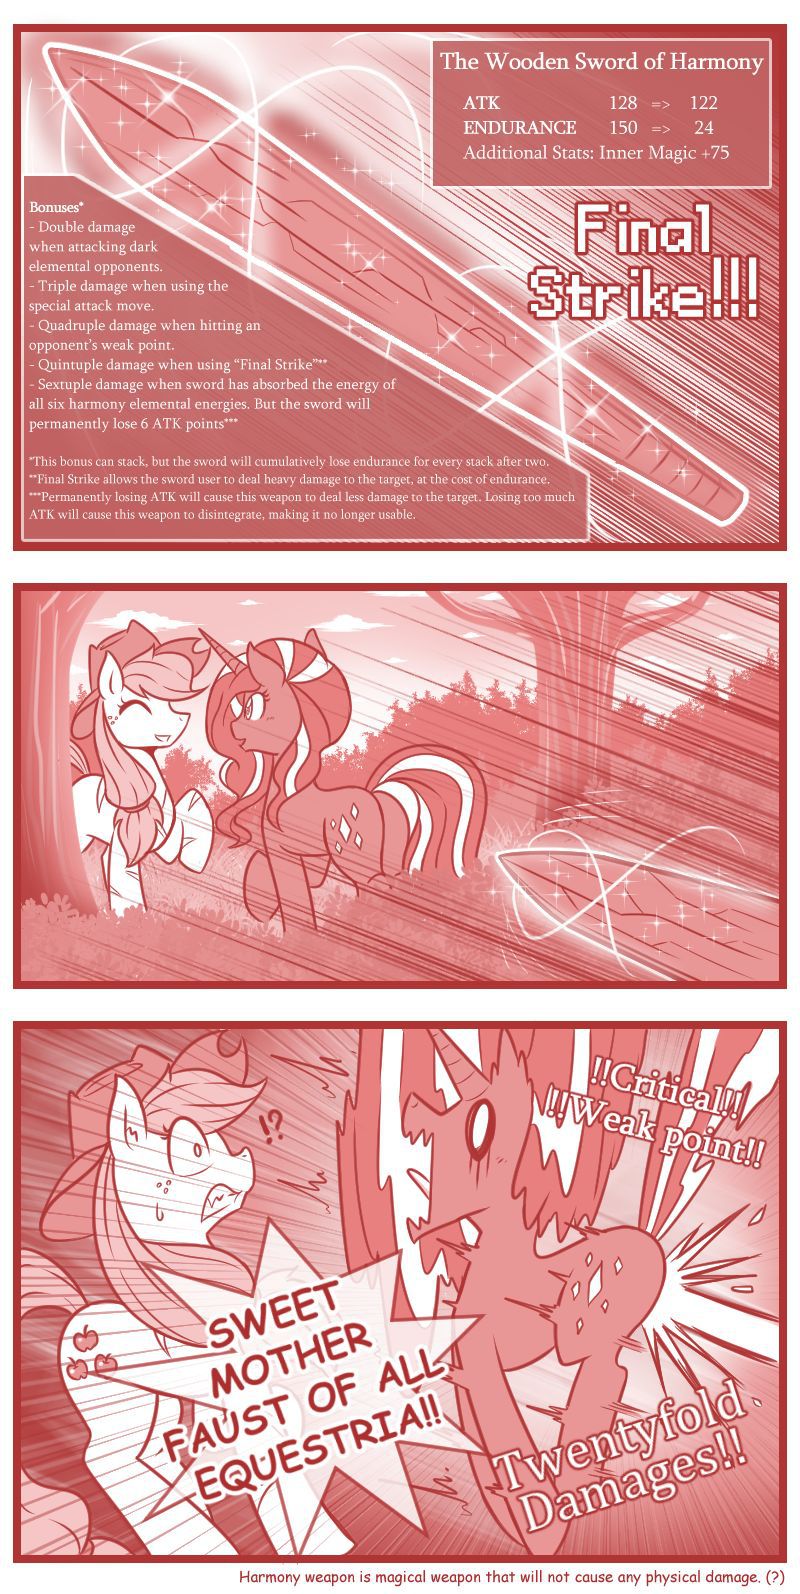 [Vavacung] Chaos Future (My Little Pony: Friendship is Magic) [Ongoing] 66